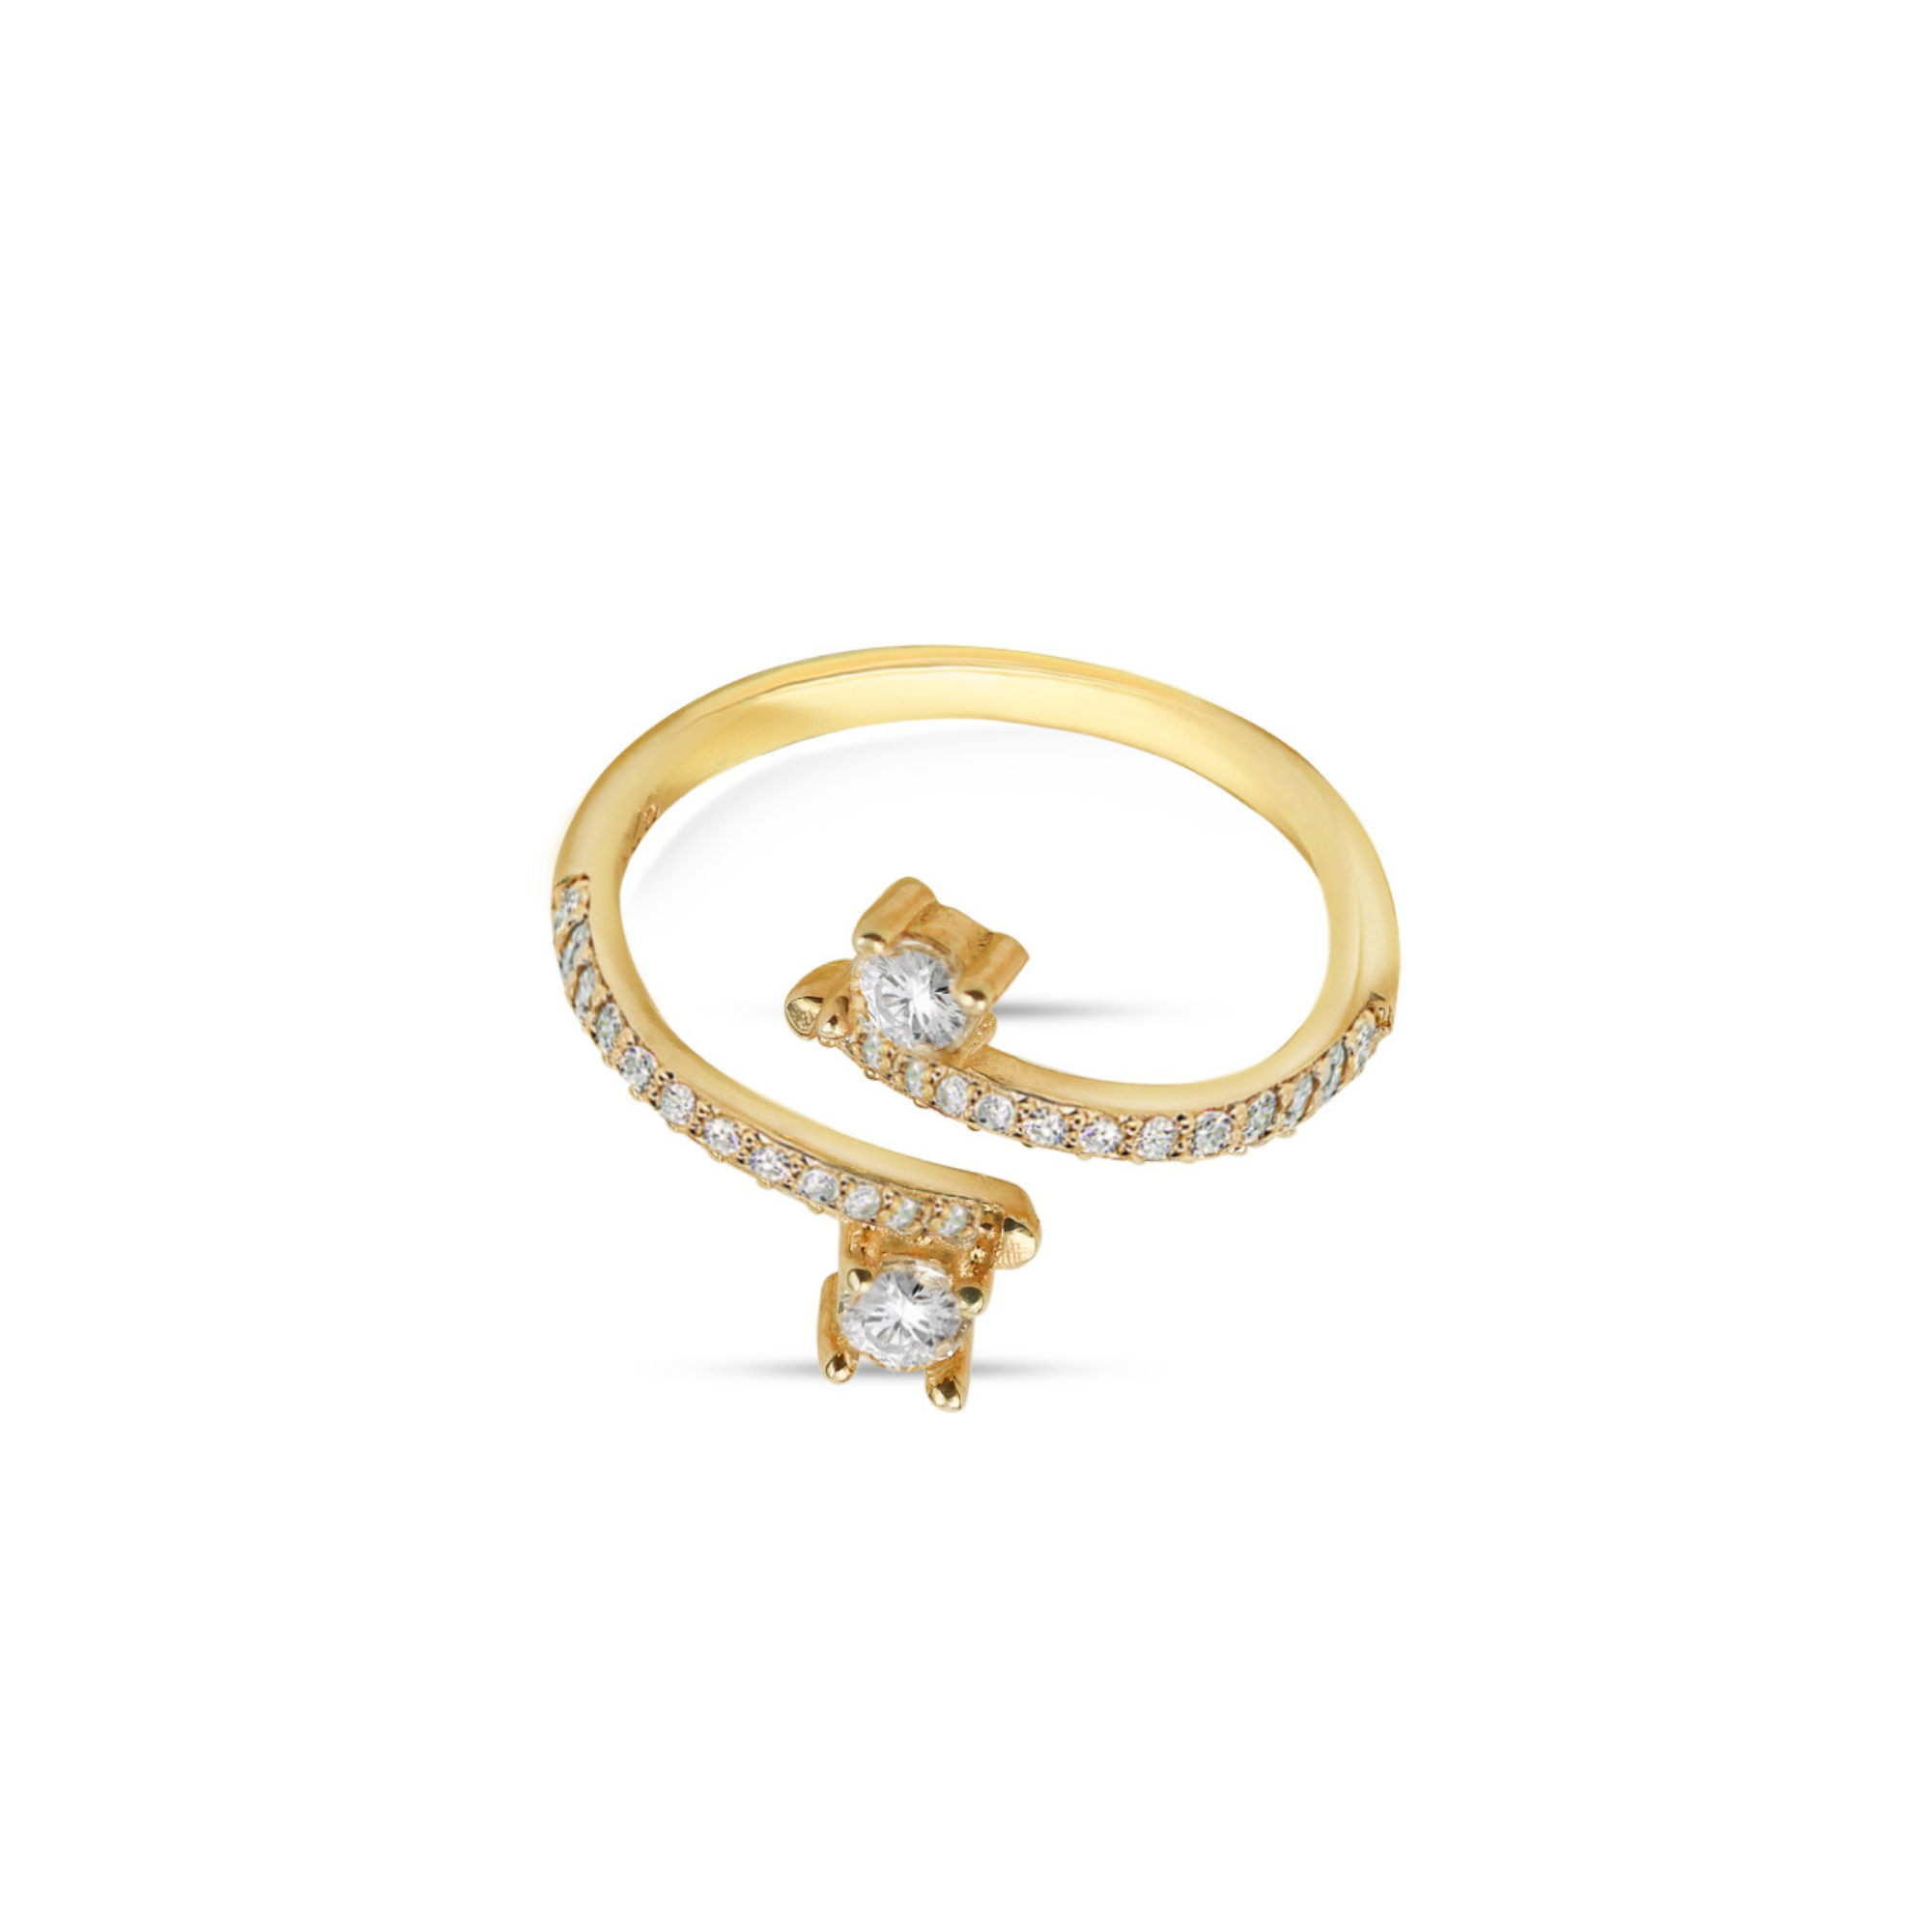 THE ESSENTIAL WRAP CZ RING